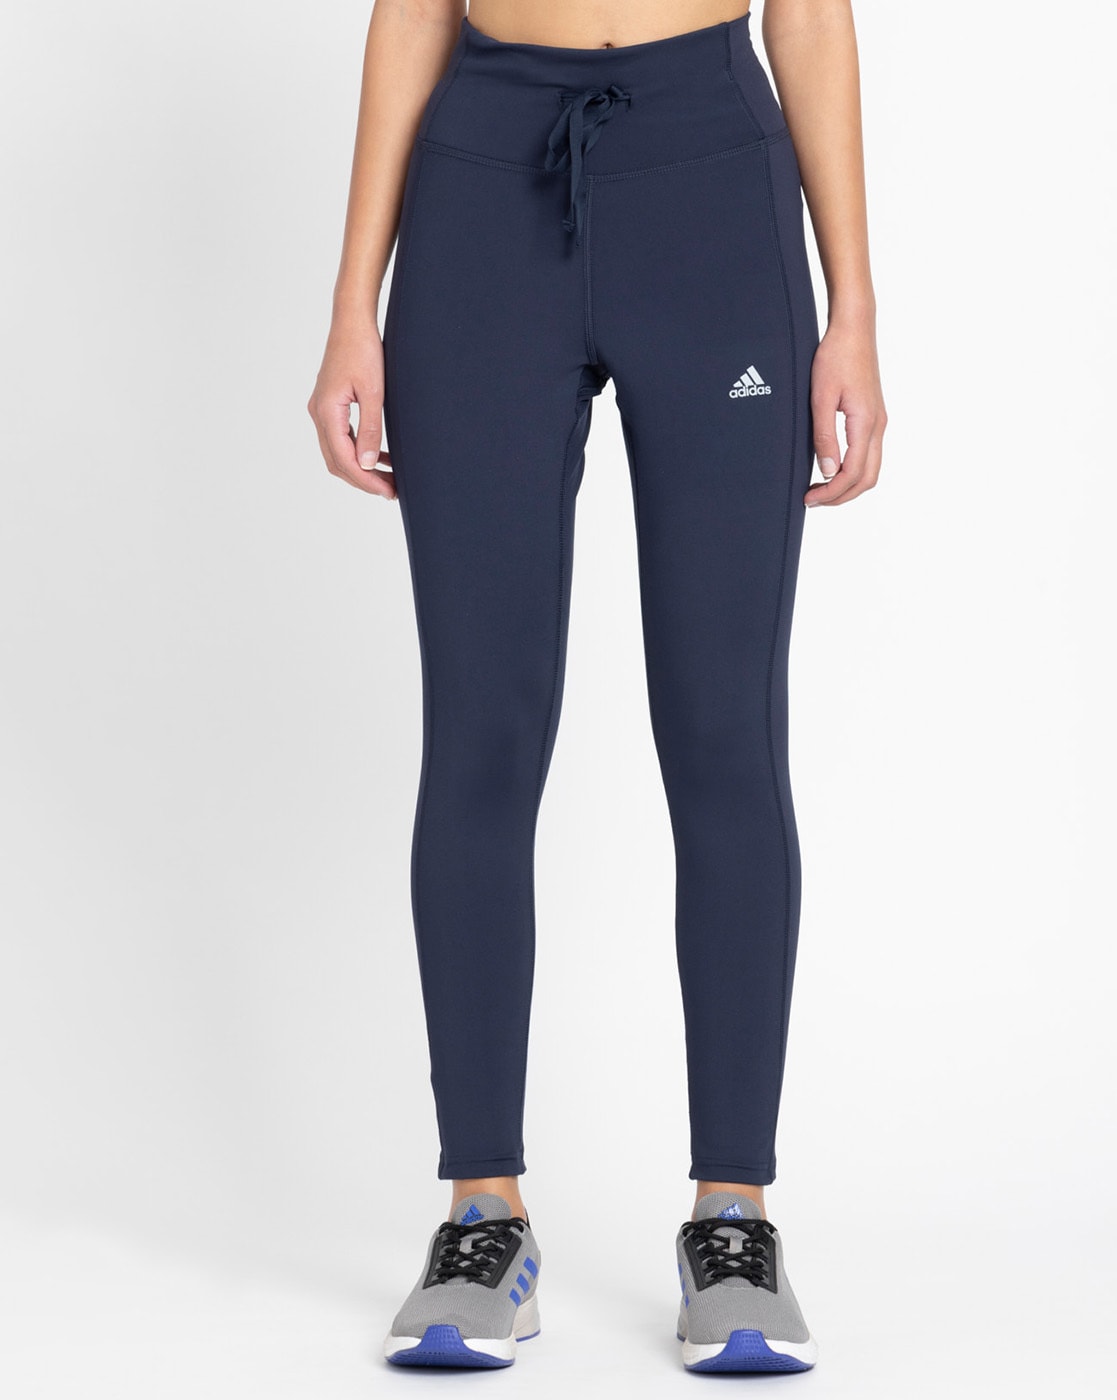 Adidas Womens Tights - Buy Adidas Womens Tights Online at Best Prices In  India | Flipkart.com